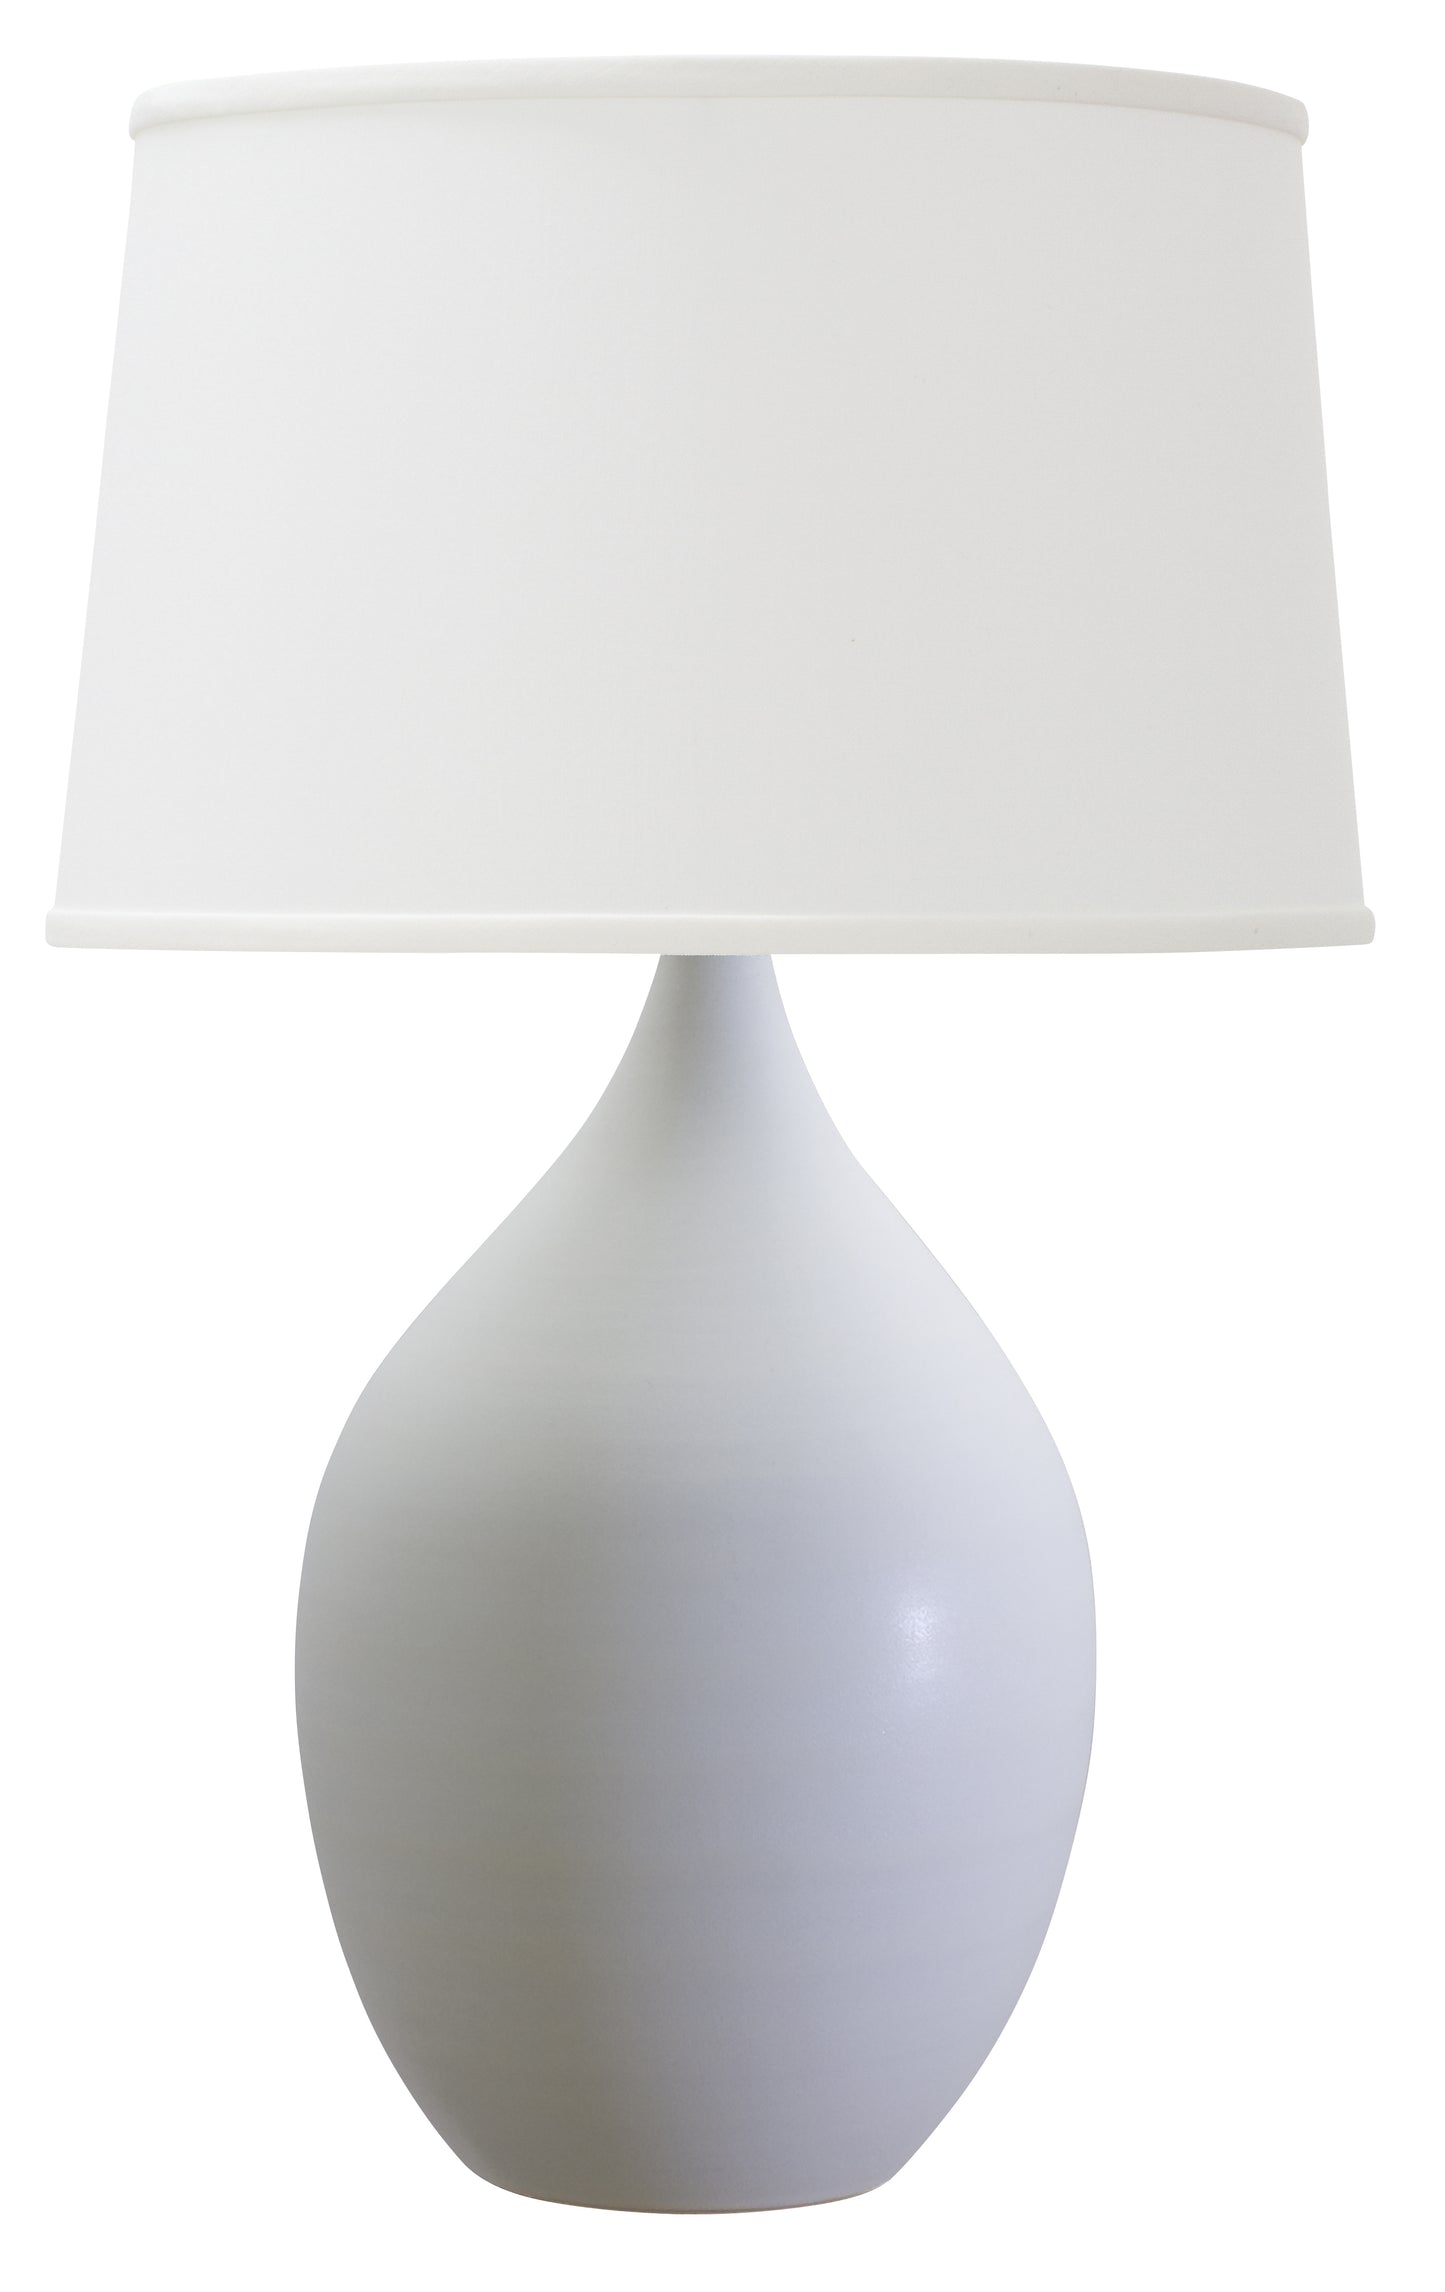 House of Troy Scatchard 24.5" Stoneware Table Lamp in White Matte GS402-WM